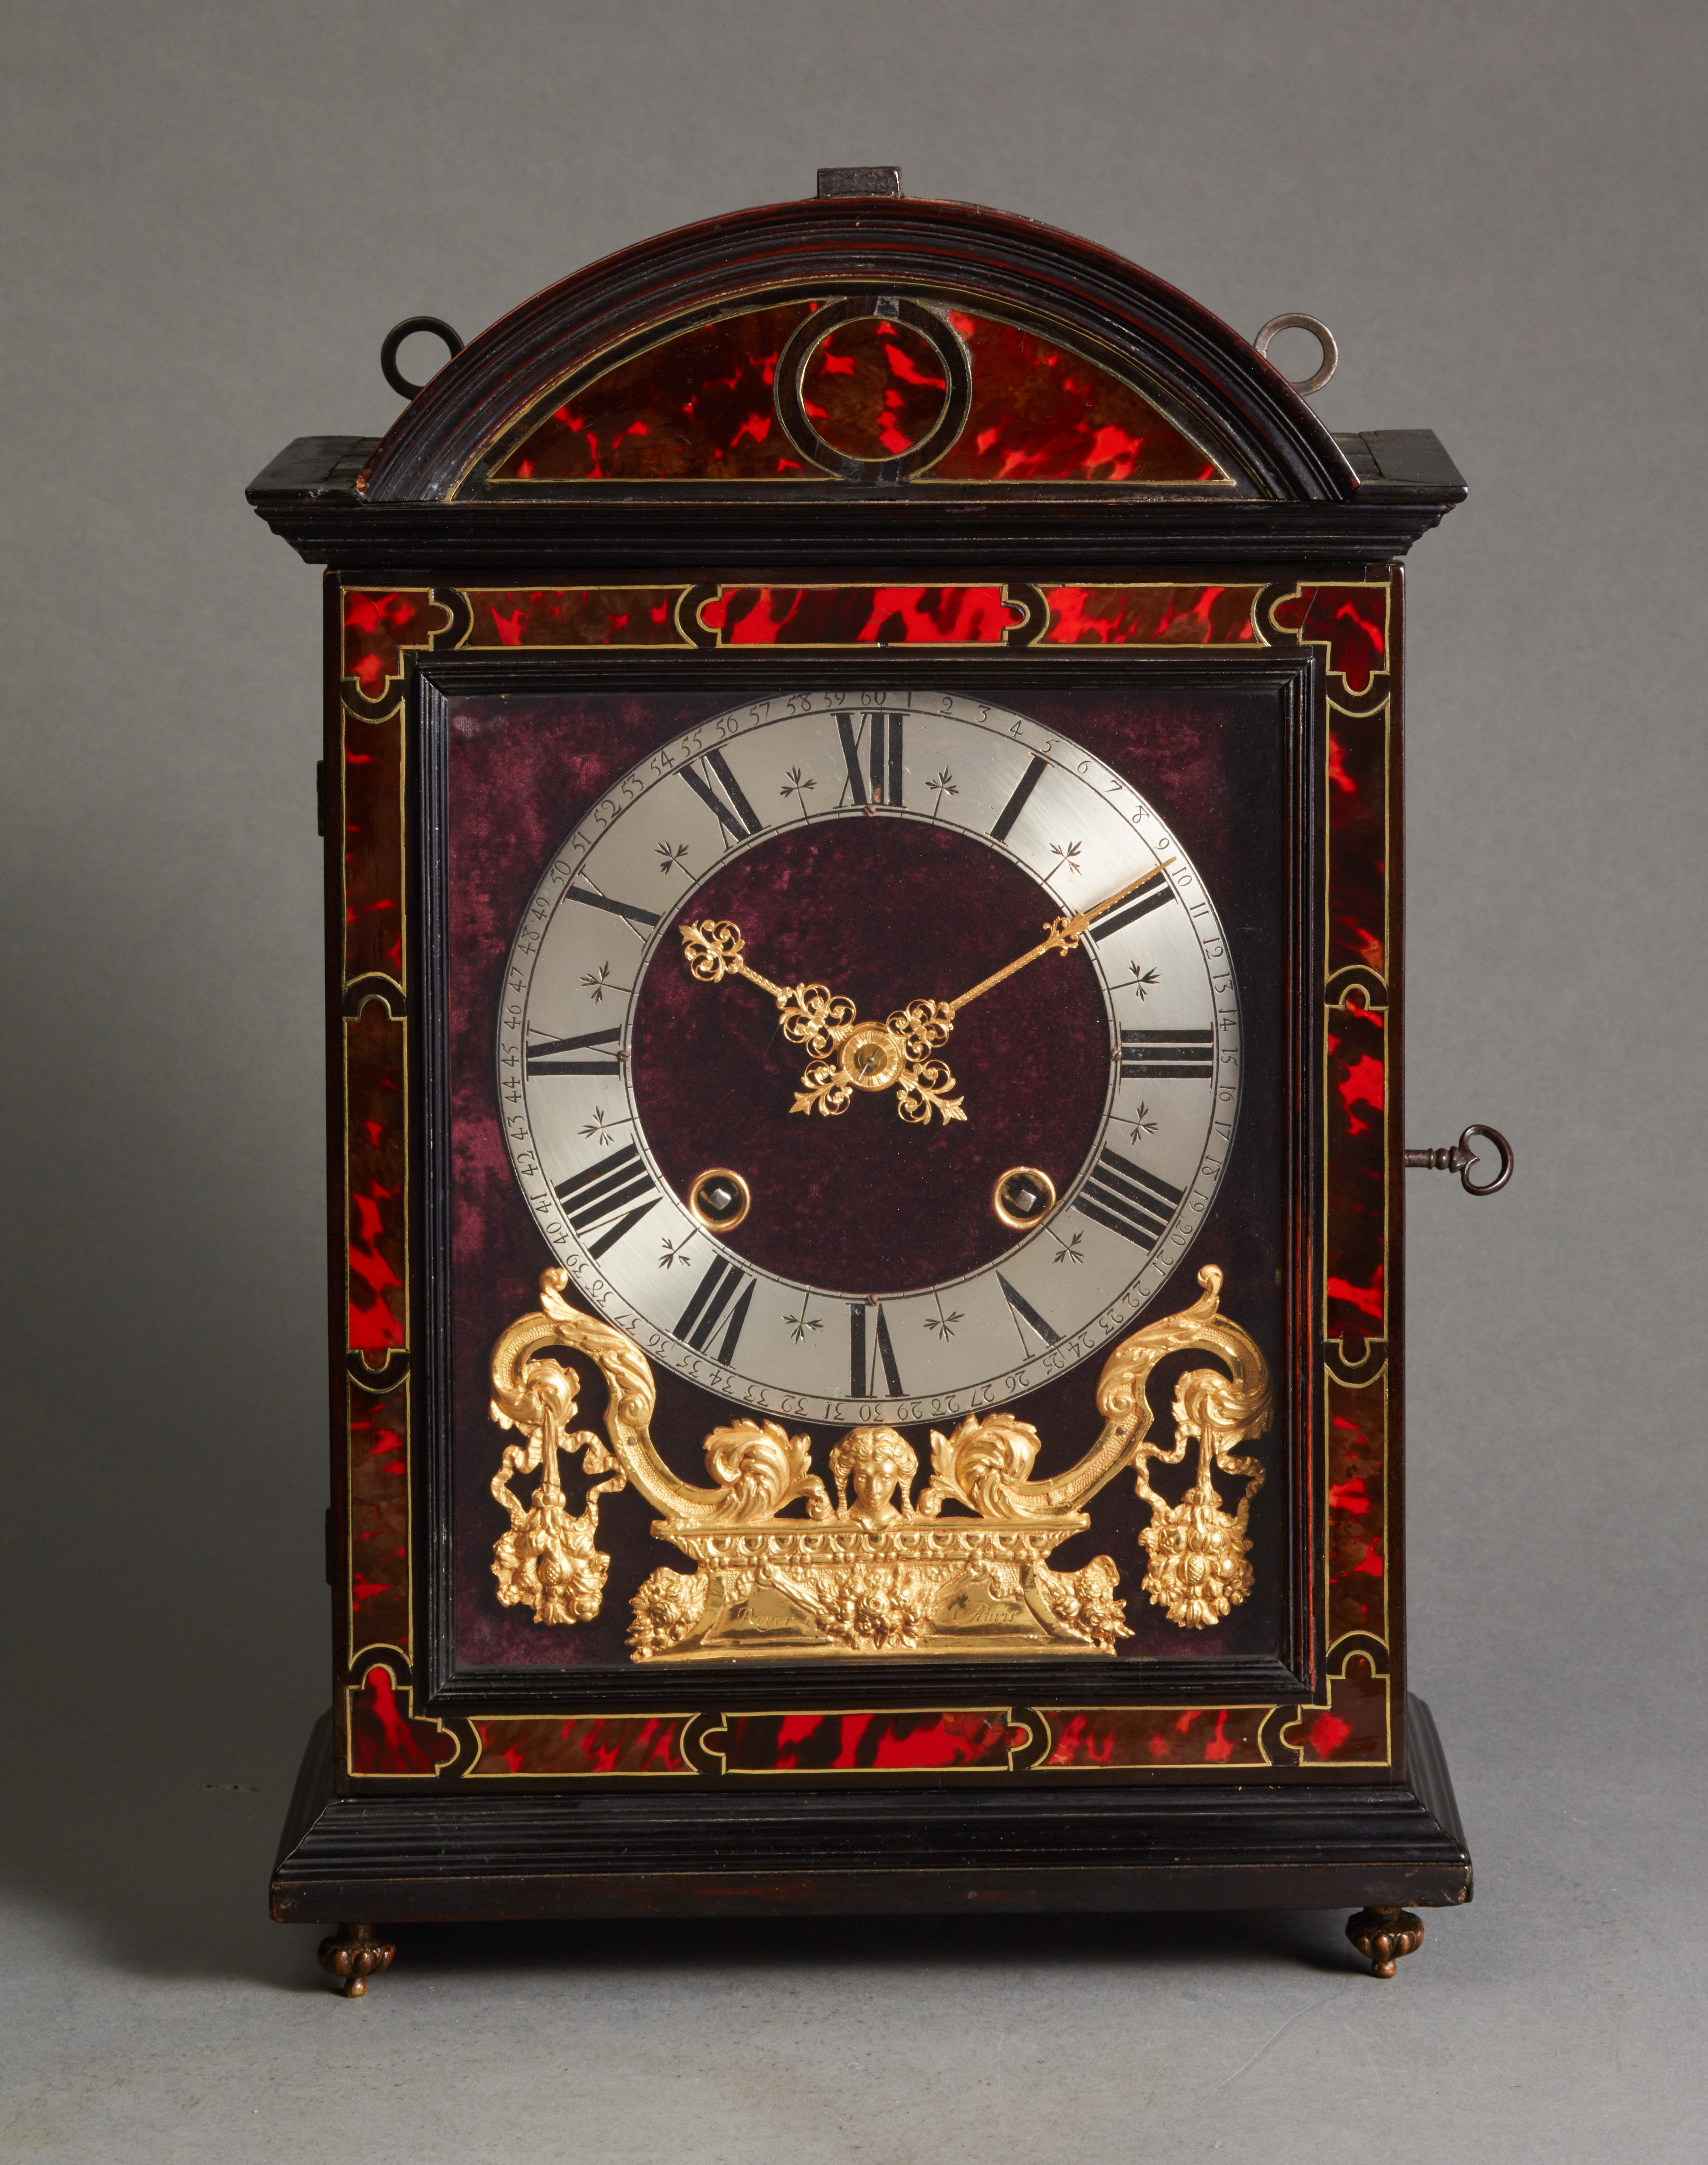 Late 17th century Louis XIV religieuse clock signed 